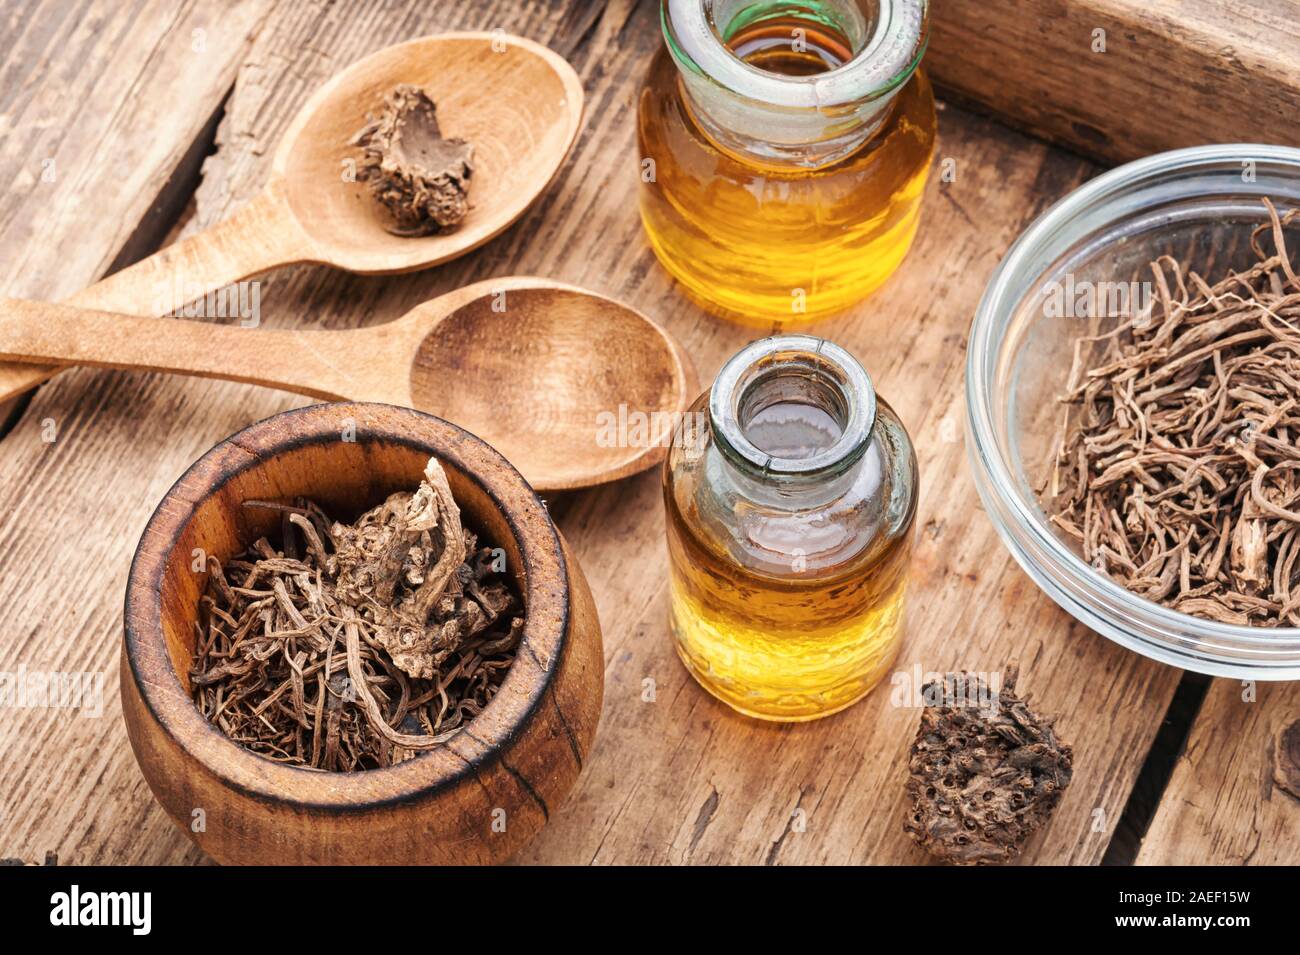 Medicinal tincture from the roots and rhizomes of valerian.Herbal medicine.Healing plants Stock Photo